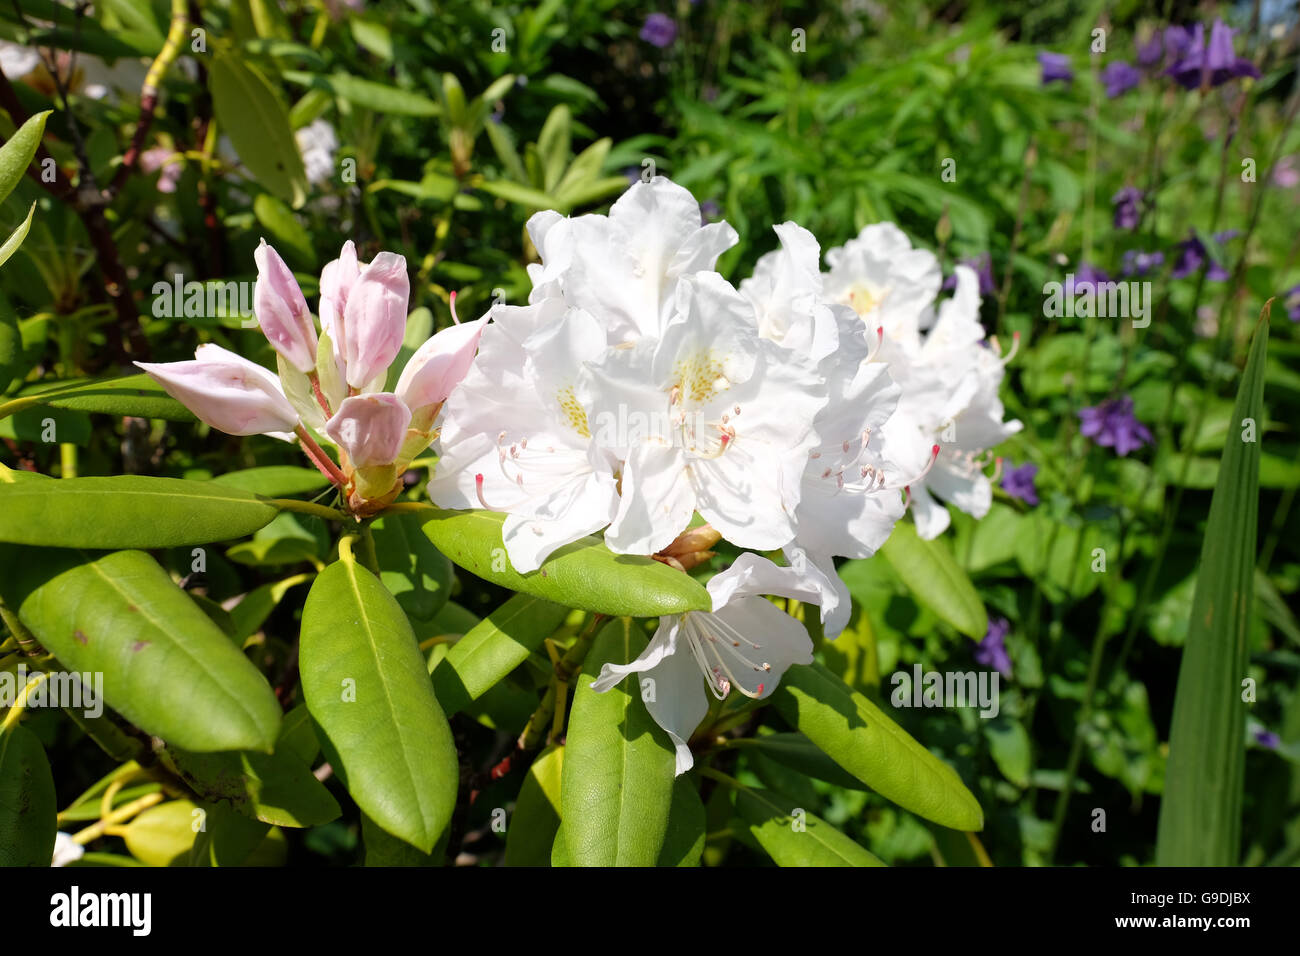 rhododendrons flowering in spring Stock Photo